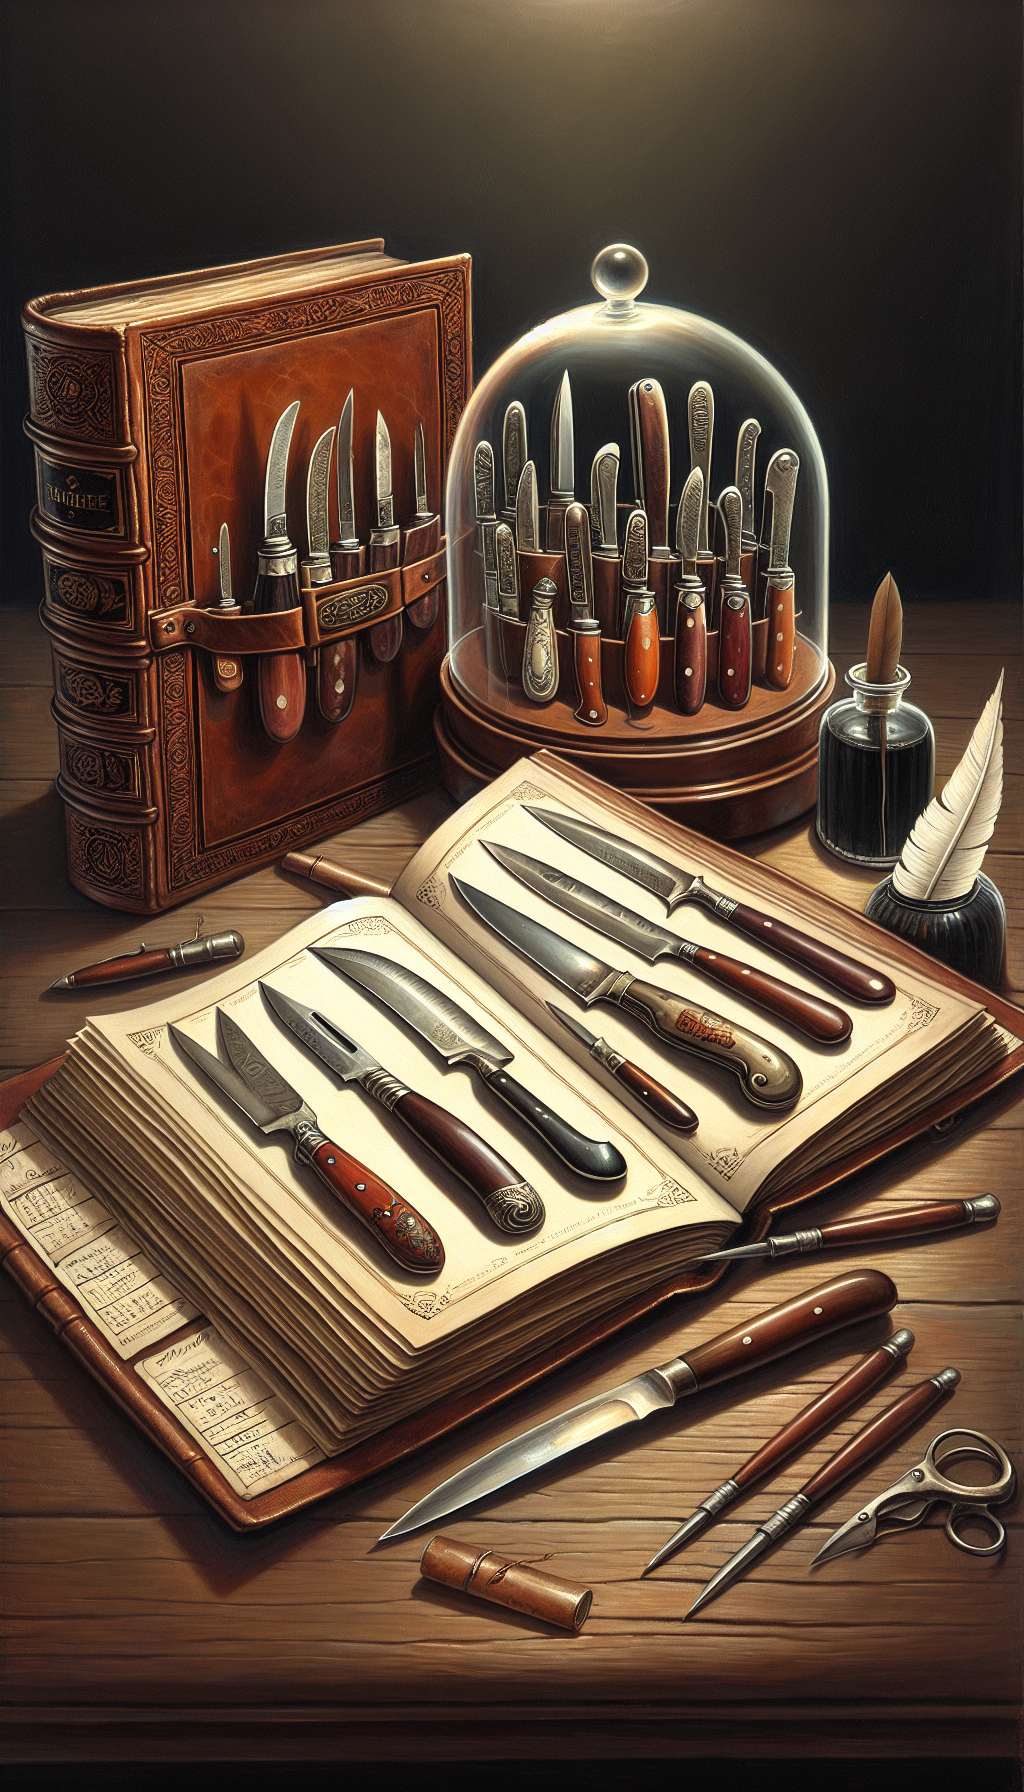 An illustration displaying an open, antique leather-bound book with magnified, glowing pages illustrating various vintage knife maker marks. Alongside, a pristine knife collection rests under a transparent protective dome, with labeled tabs indicating their origins. The dome casts a soft light, symbolizing preservation, while a quill and ink bottle sit ready for documentation, blending steampunk and classical art styles.